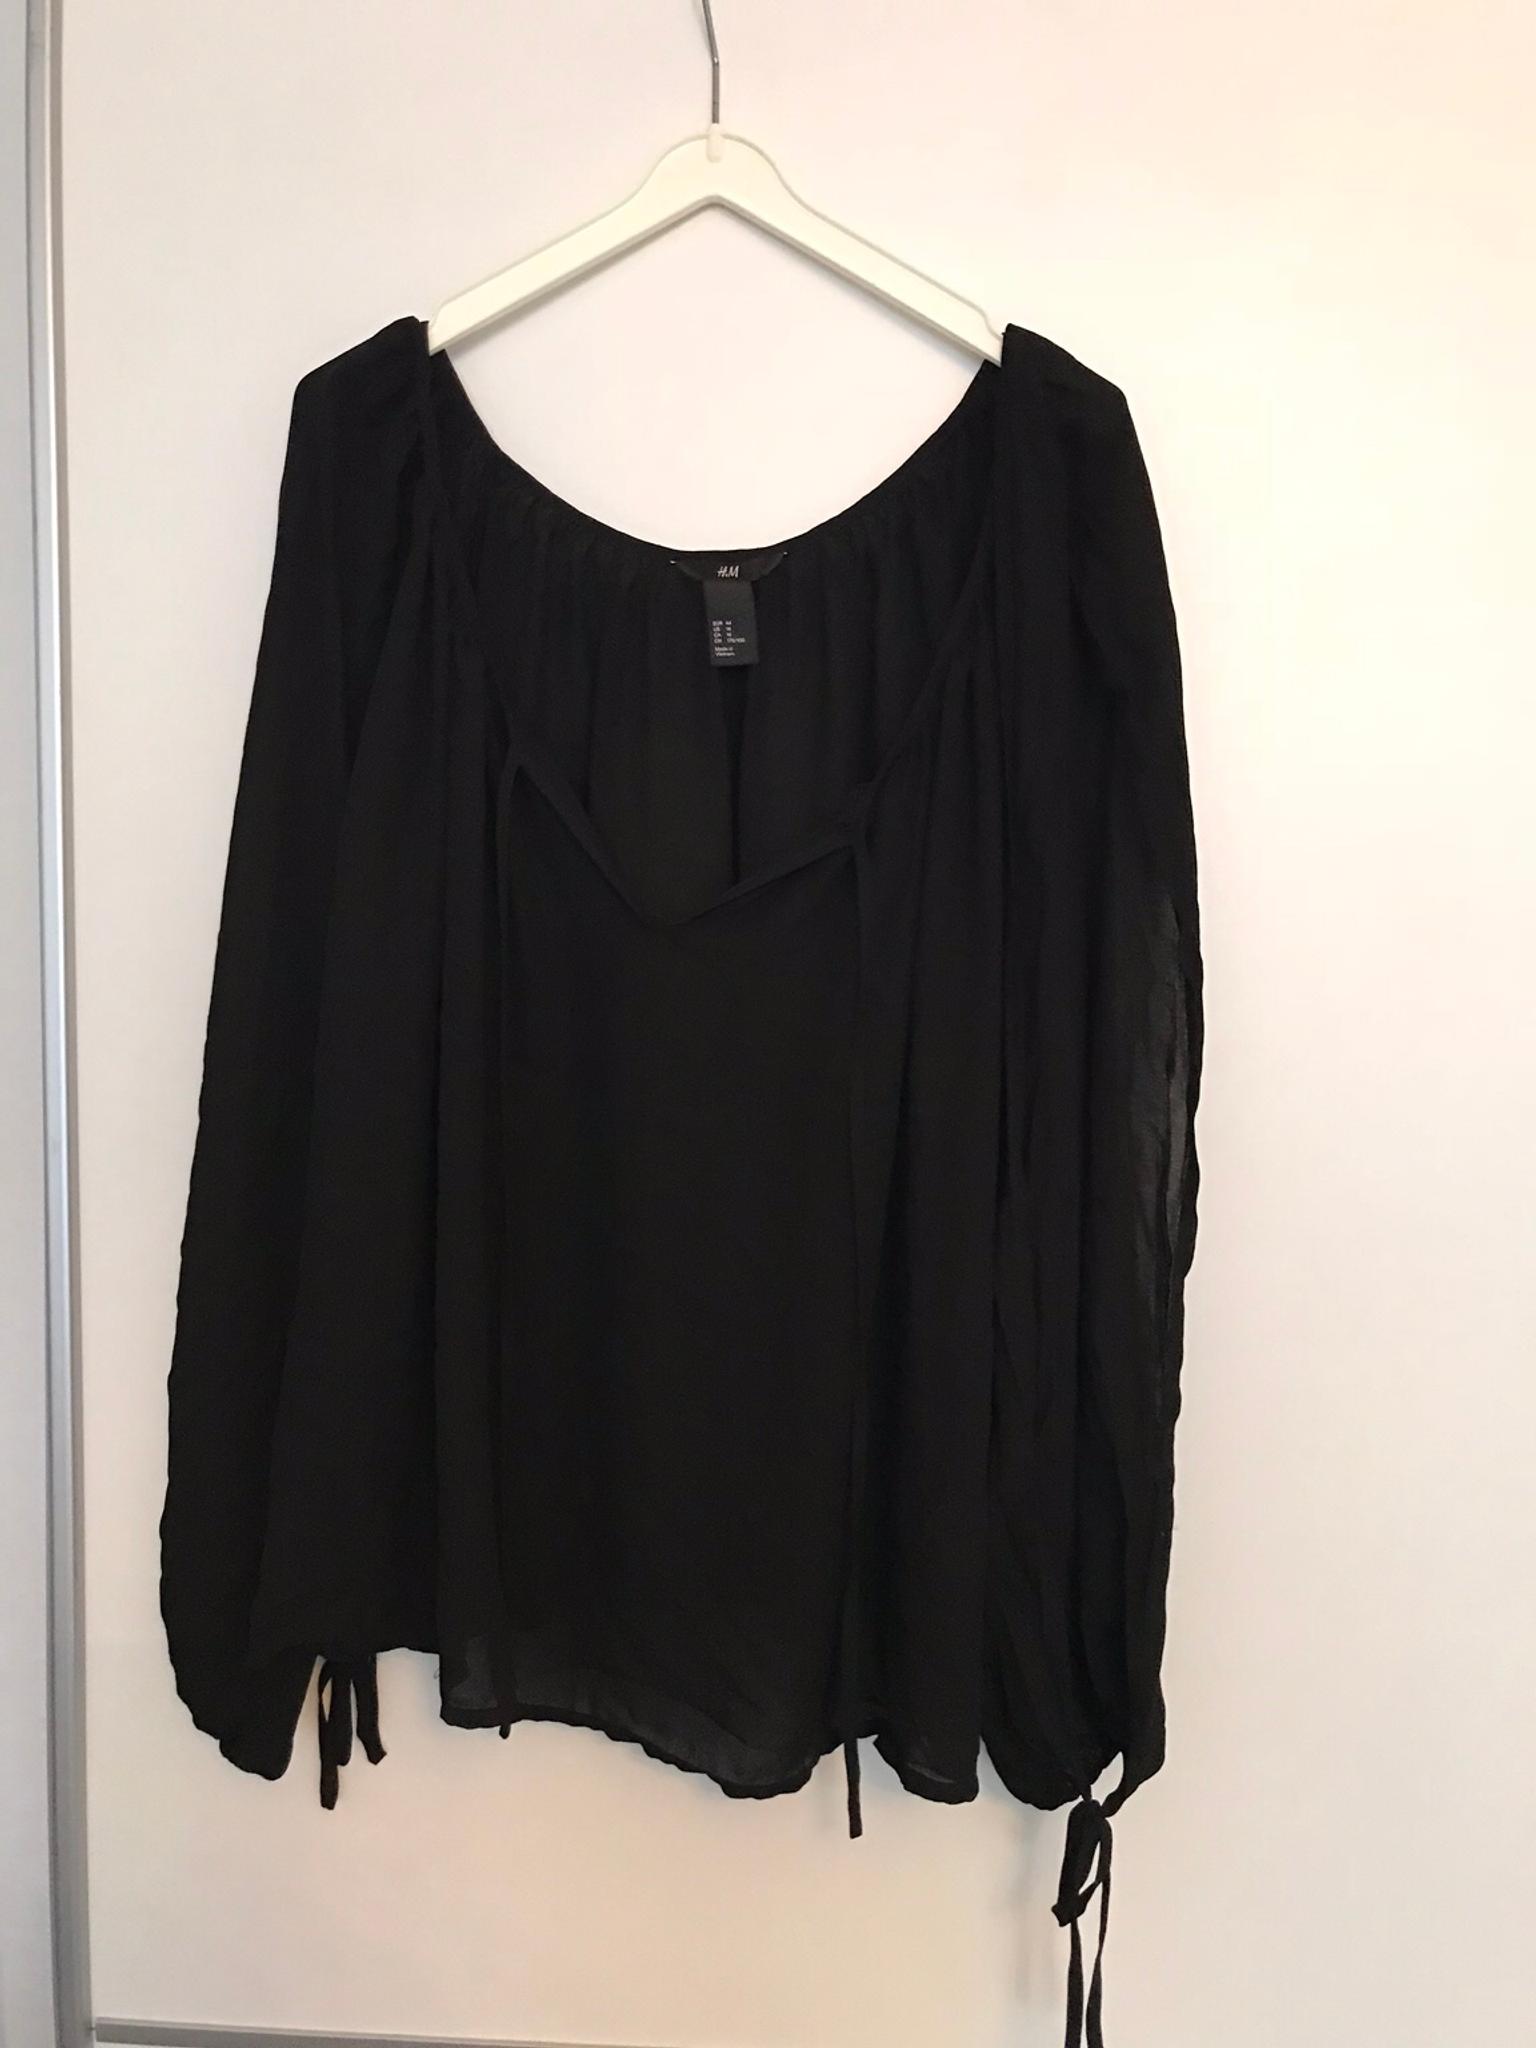 Schwarze Bluse Von H M In Rahlstedt For 12 00 For Sale Shpock